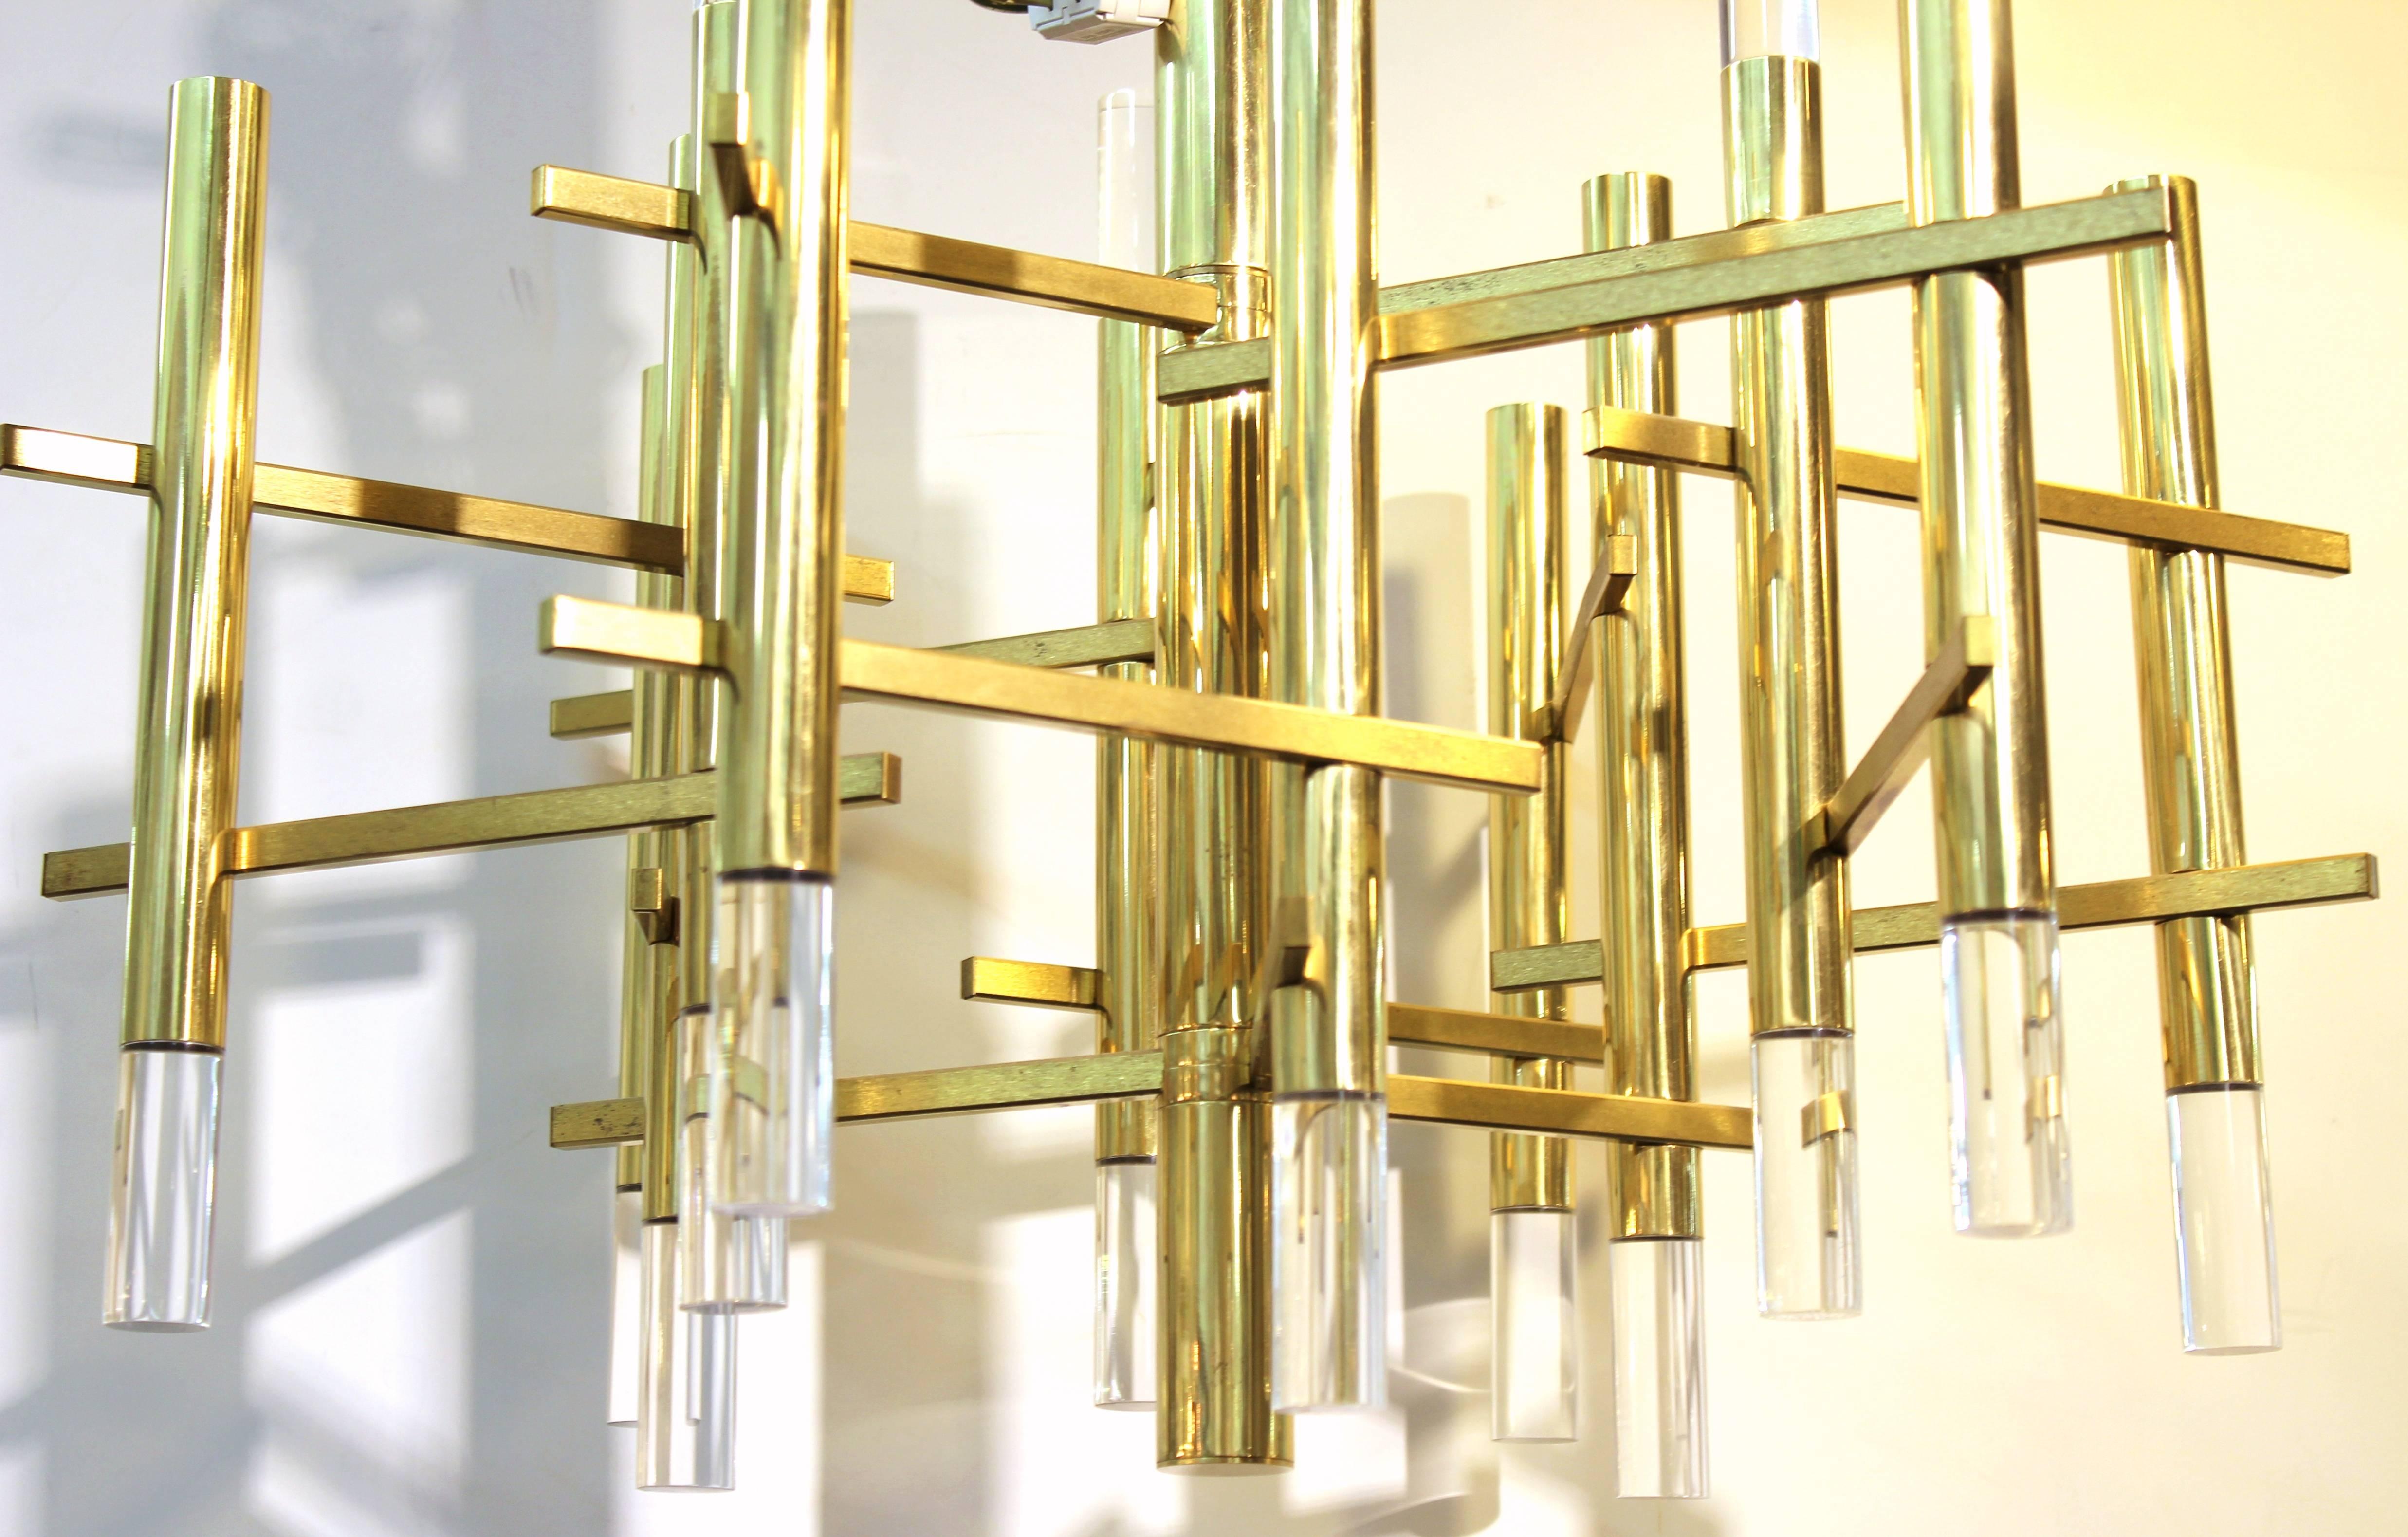 An atomic era chandelier by Sciolari with cylindrical brass arms, each capped with Lucite prisms either on the top or bottom. The cylindrical arms are connected by horizontal brass arms and create a star-like shape when viewed from beneath. The